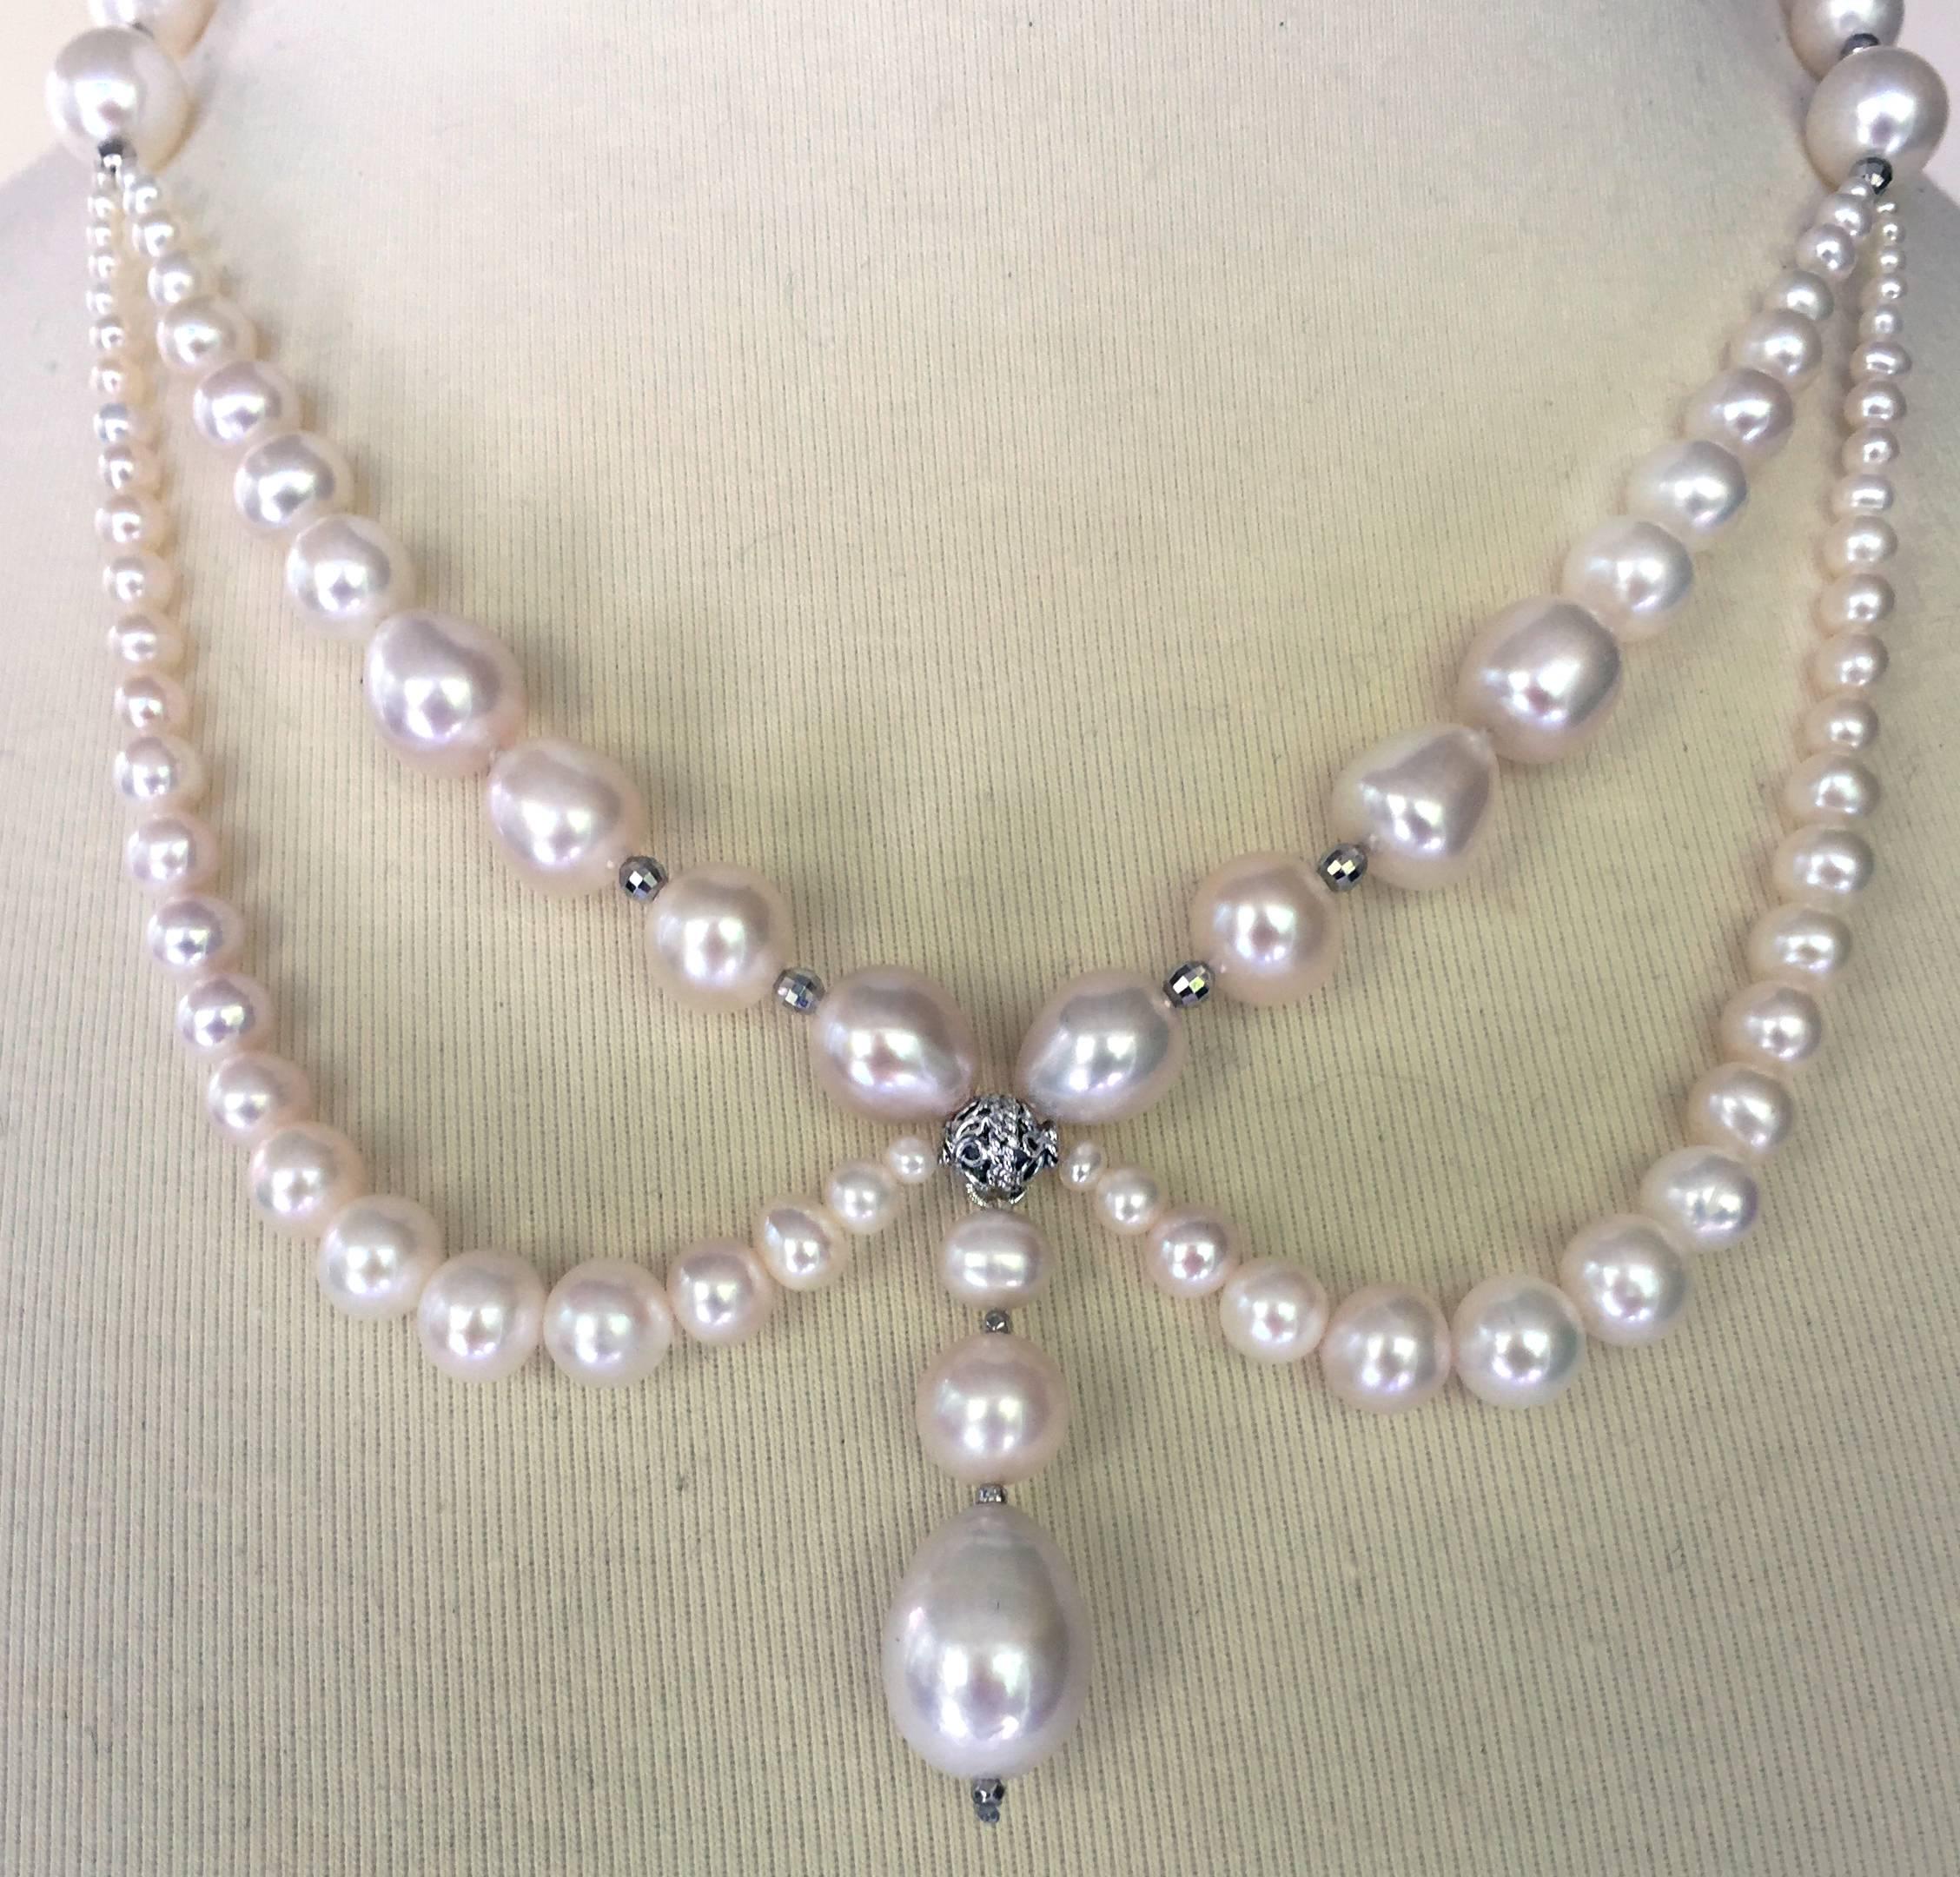 This beautiful pearl necklace is shaped with graduating pearls around the neckline and two graduated pearl drapes highlighting the collar bones. The center of the necklace has three graduated pearls hanging from a beautiful silver rhodium plated